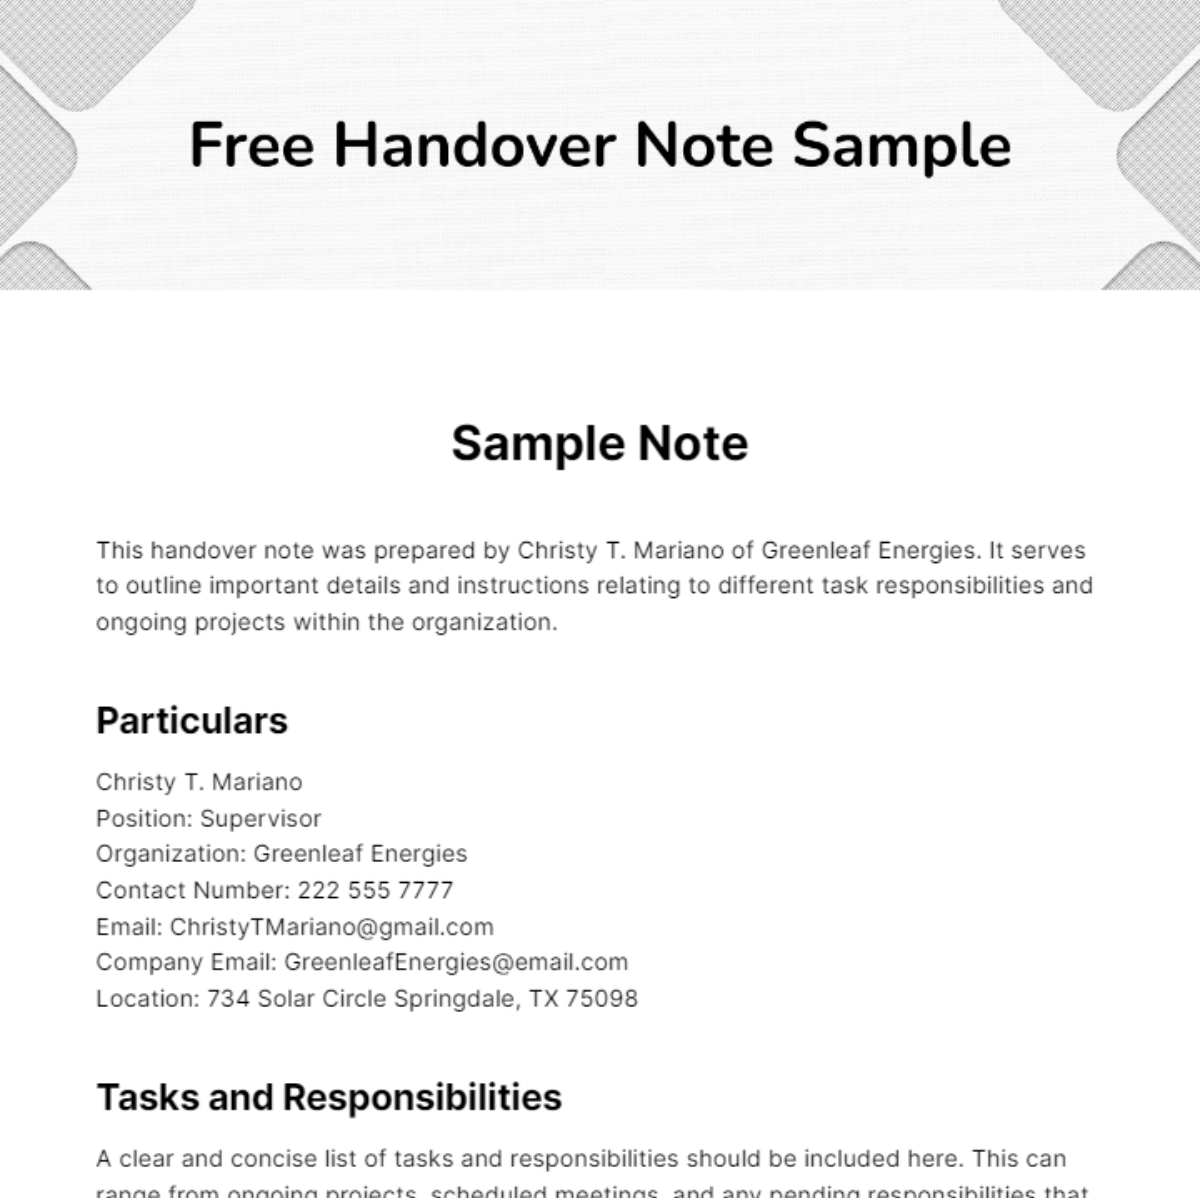 Free Handover Note Sample Template